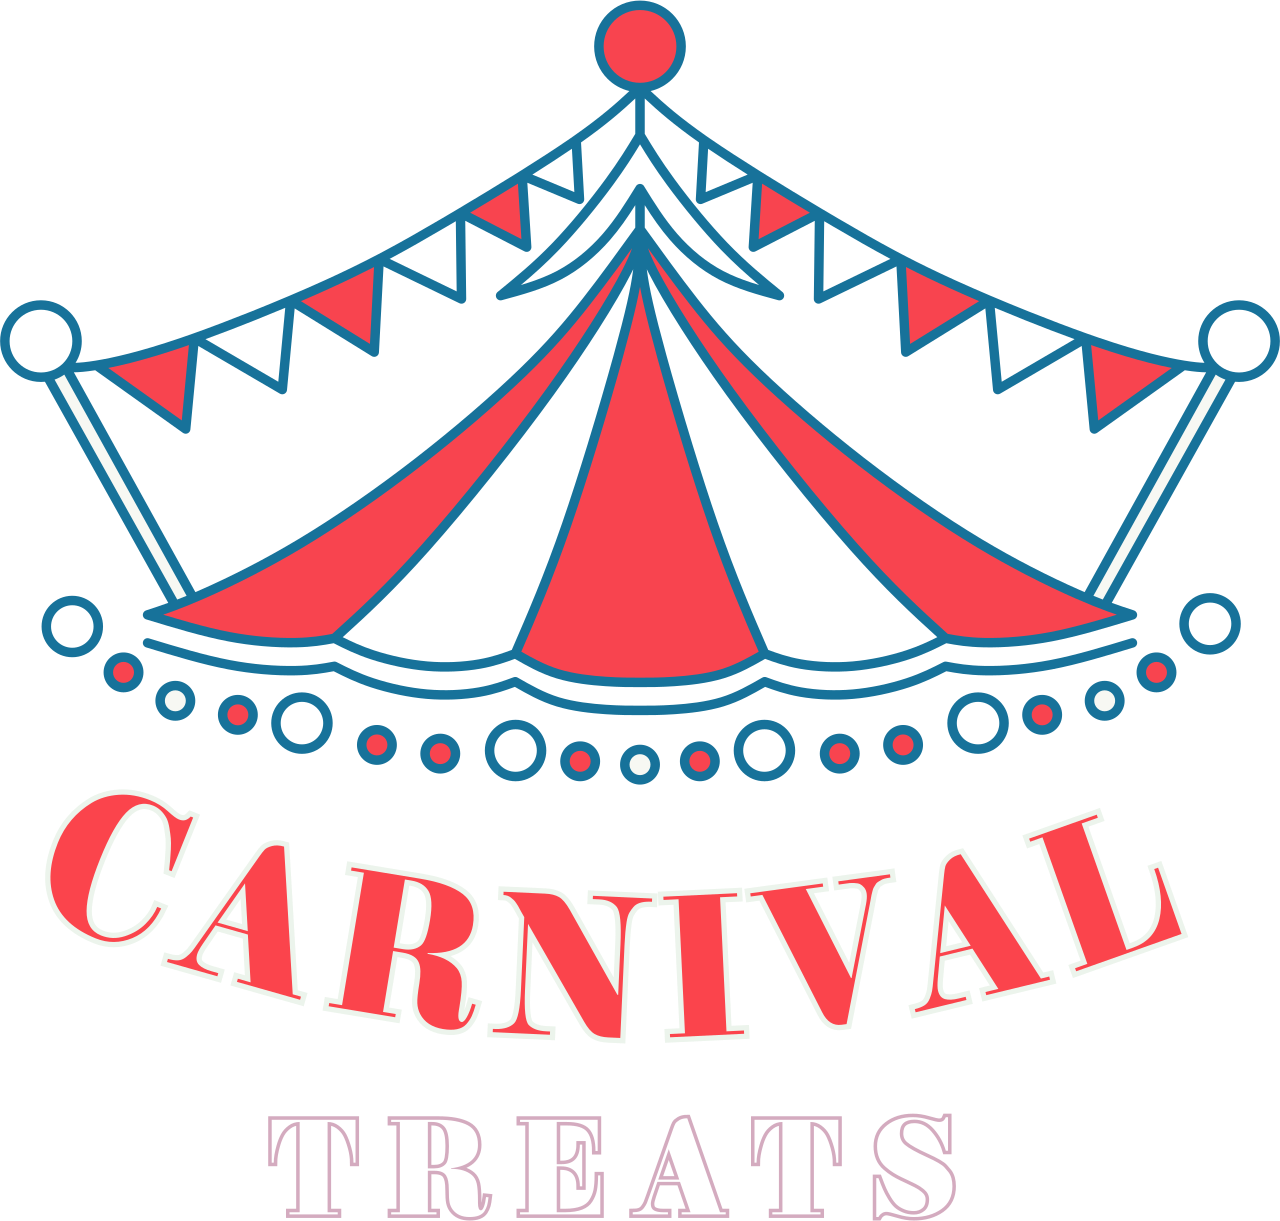 Welcome to carnival treats!'s logo